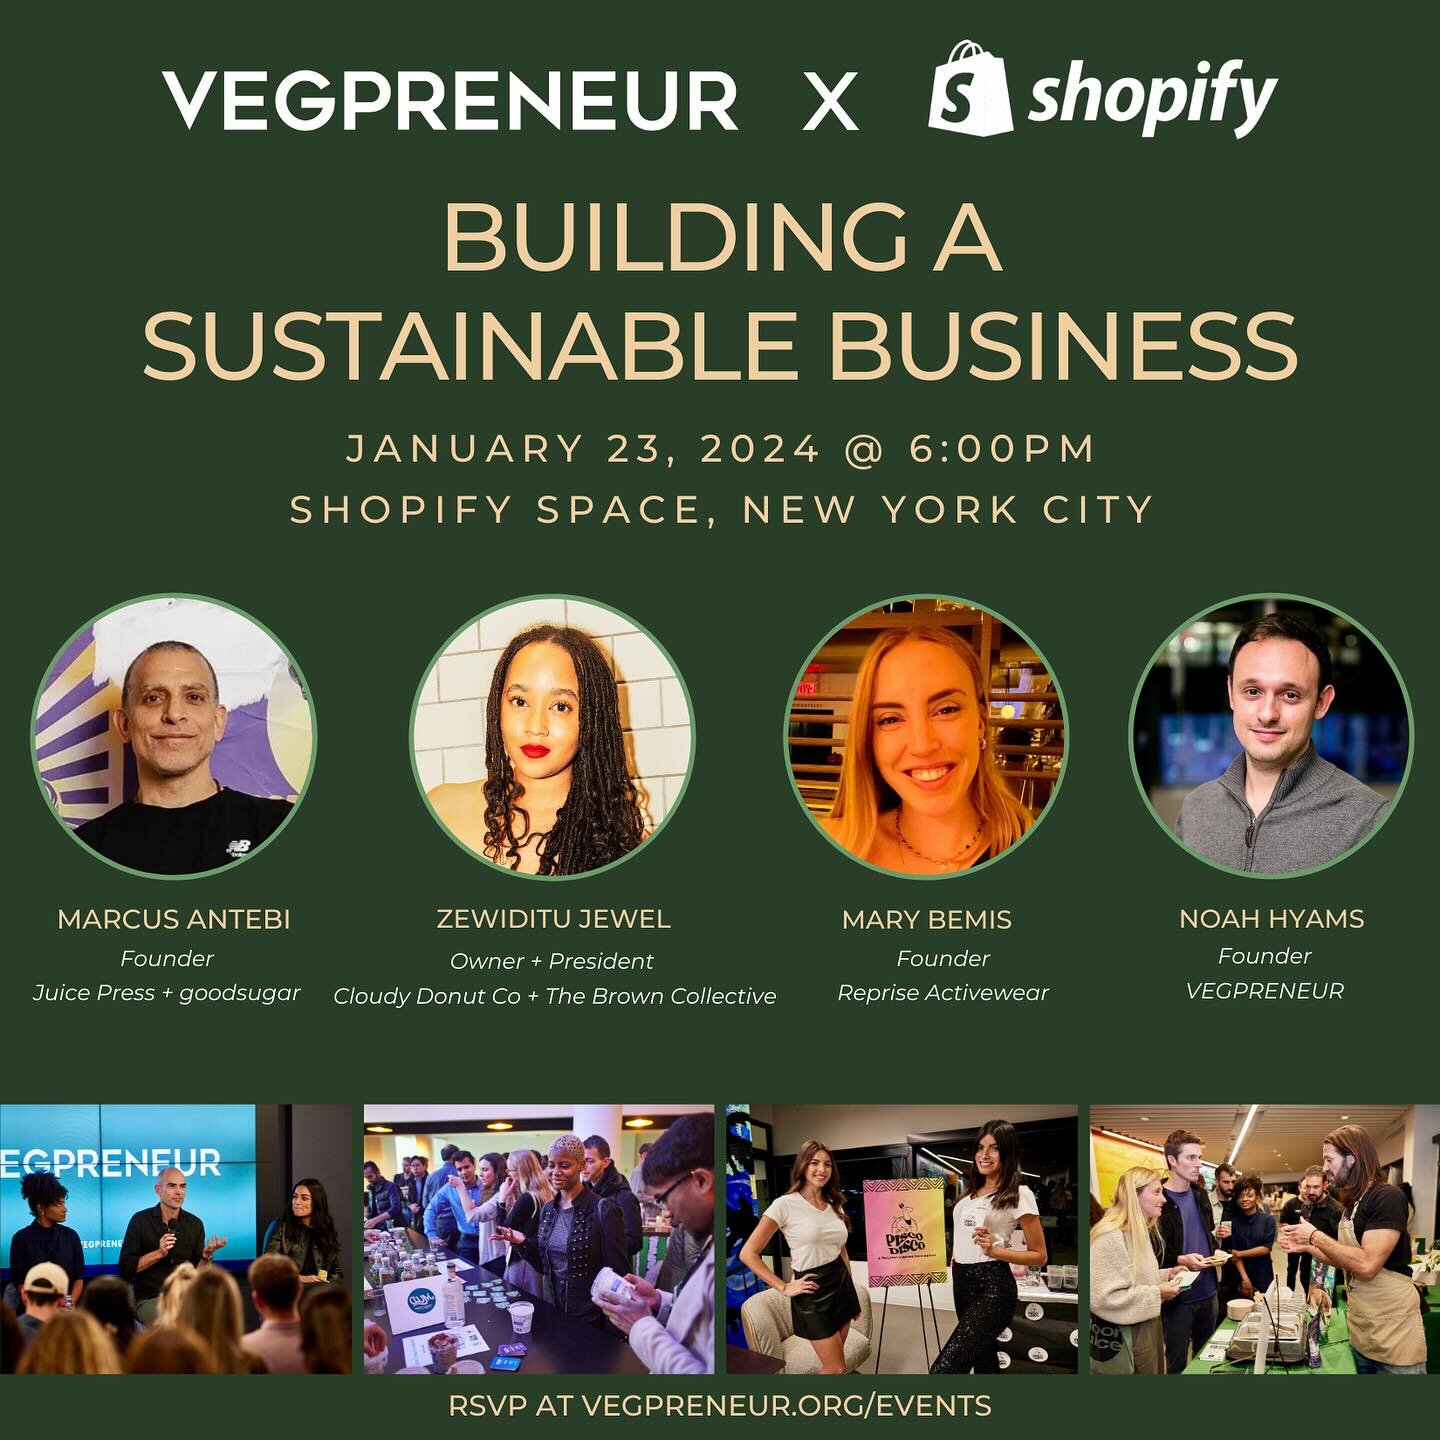 We are excited to announce that 100+ attendees have registered and an additional speaker for our event with Shopify in NYC on January 23rd 🎉

Speakers:

🧍Mary Bemis, founder of Reprise Activewear

🧍Marcus Antebi, Founder of Juice Press and goodsug